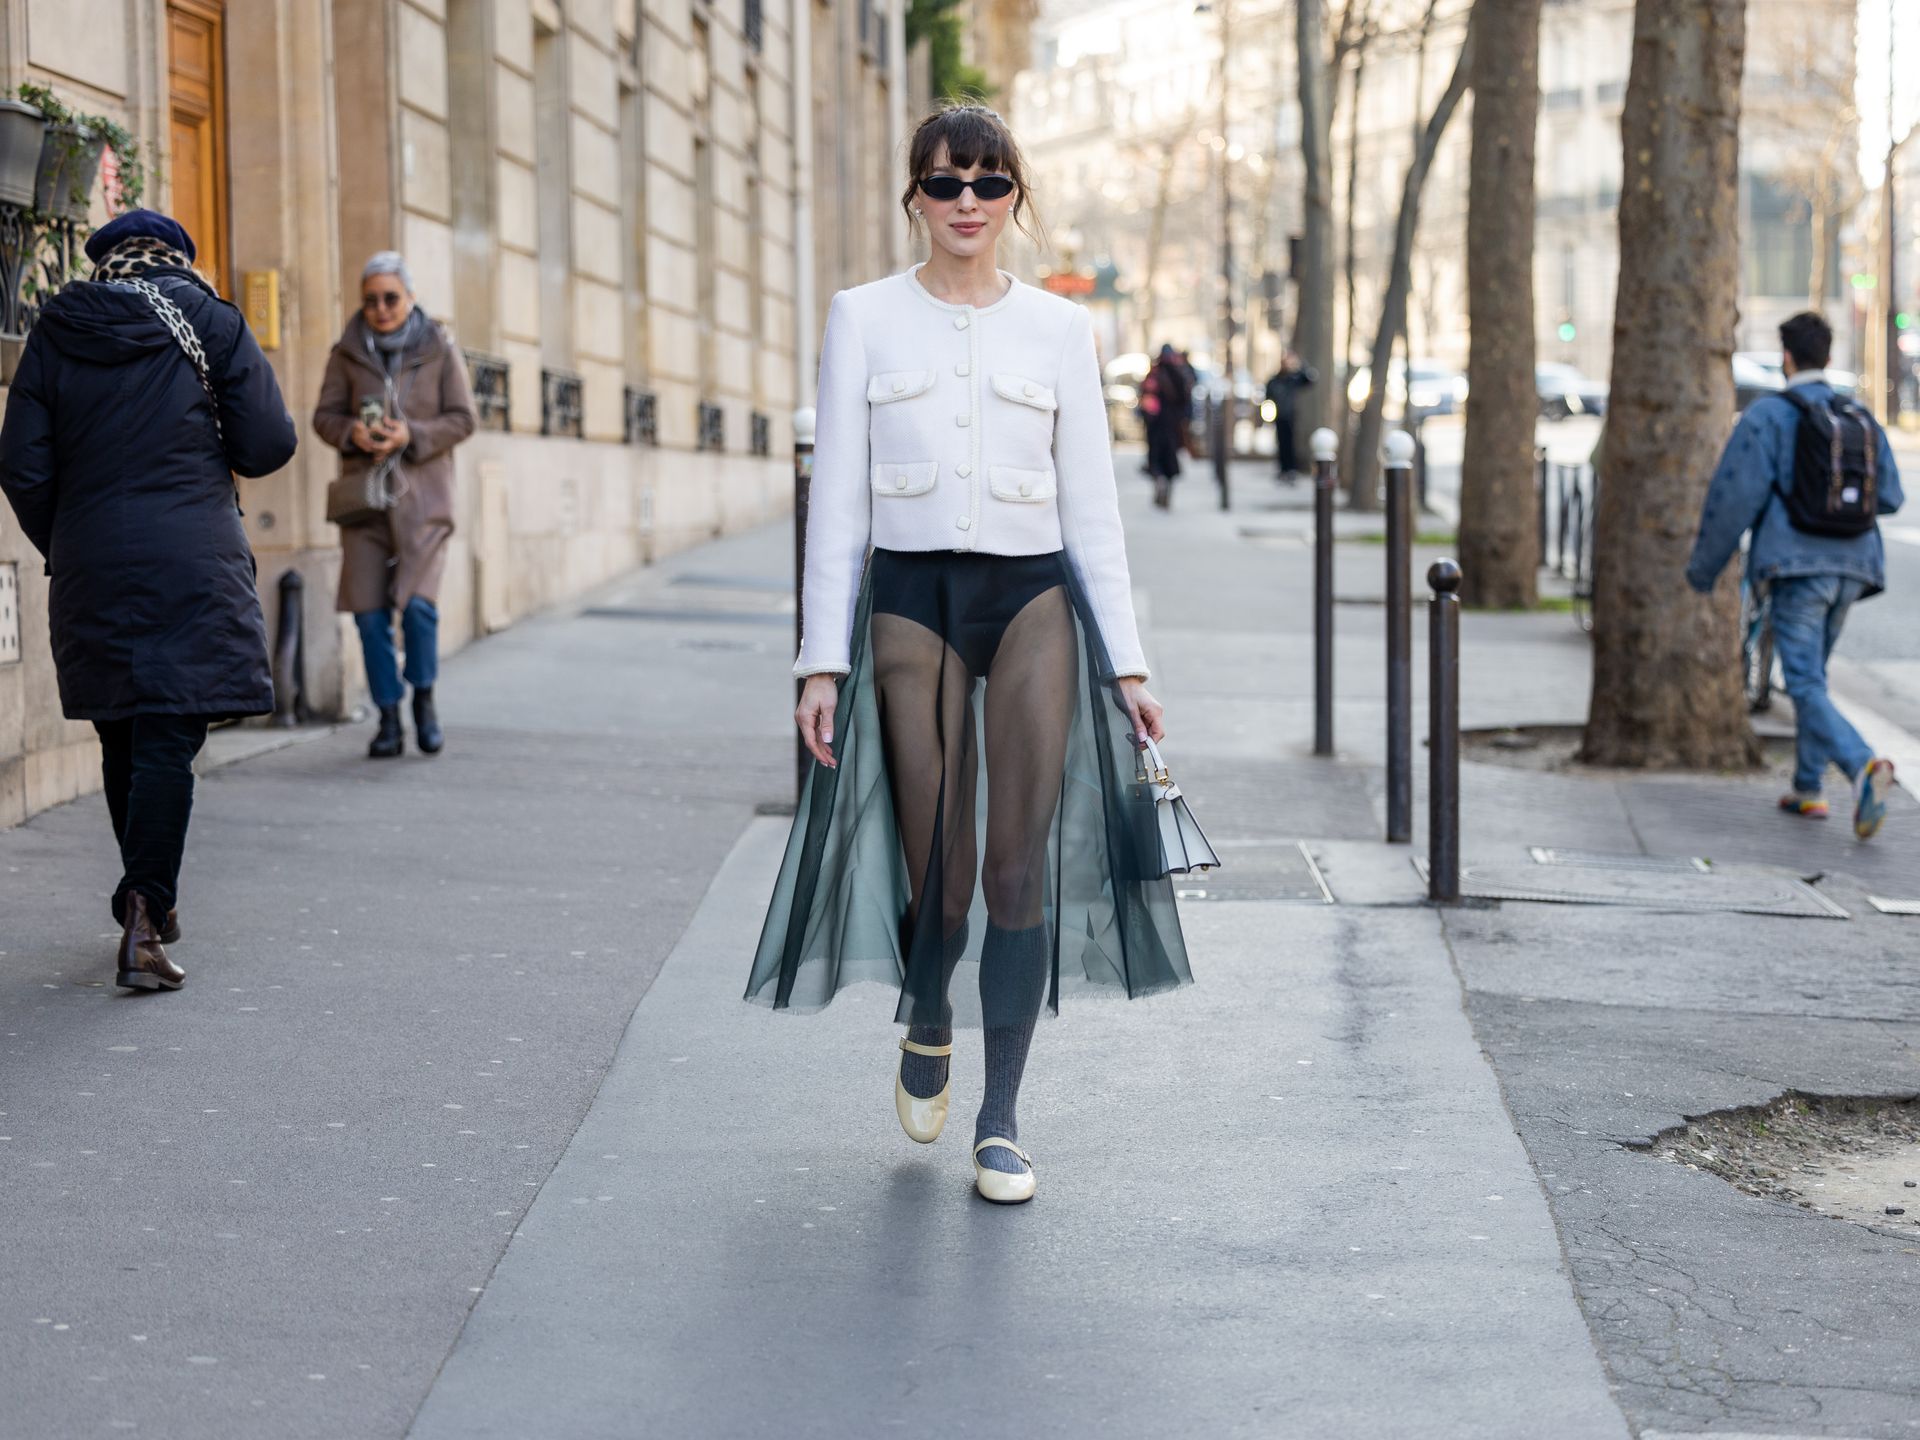 How to style sheer skirts in 2023 according to a fashion editor